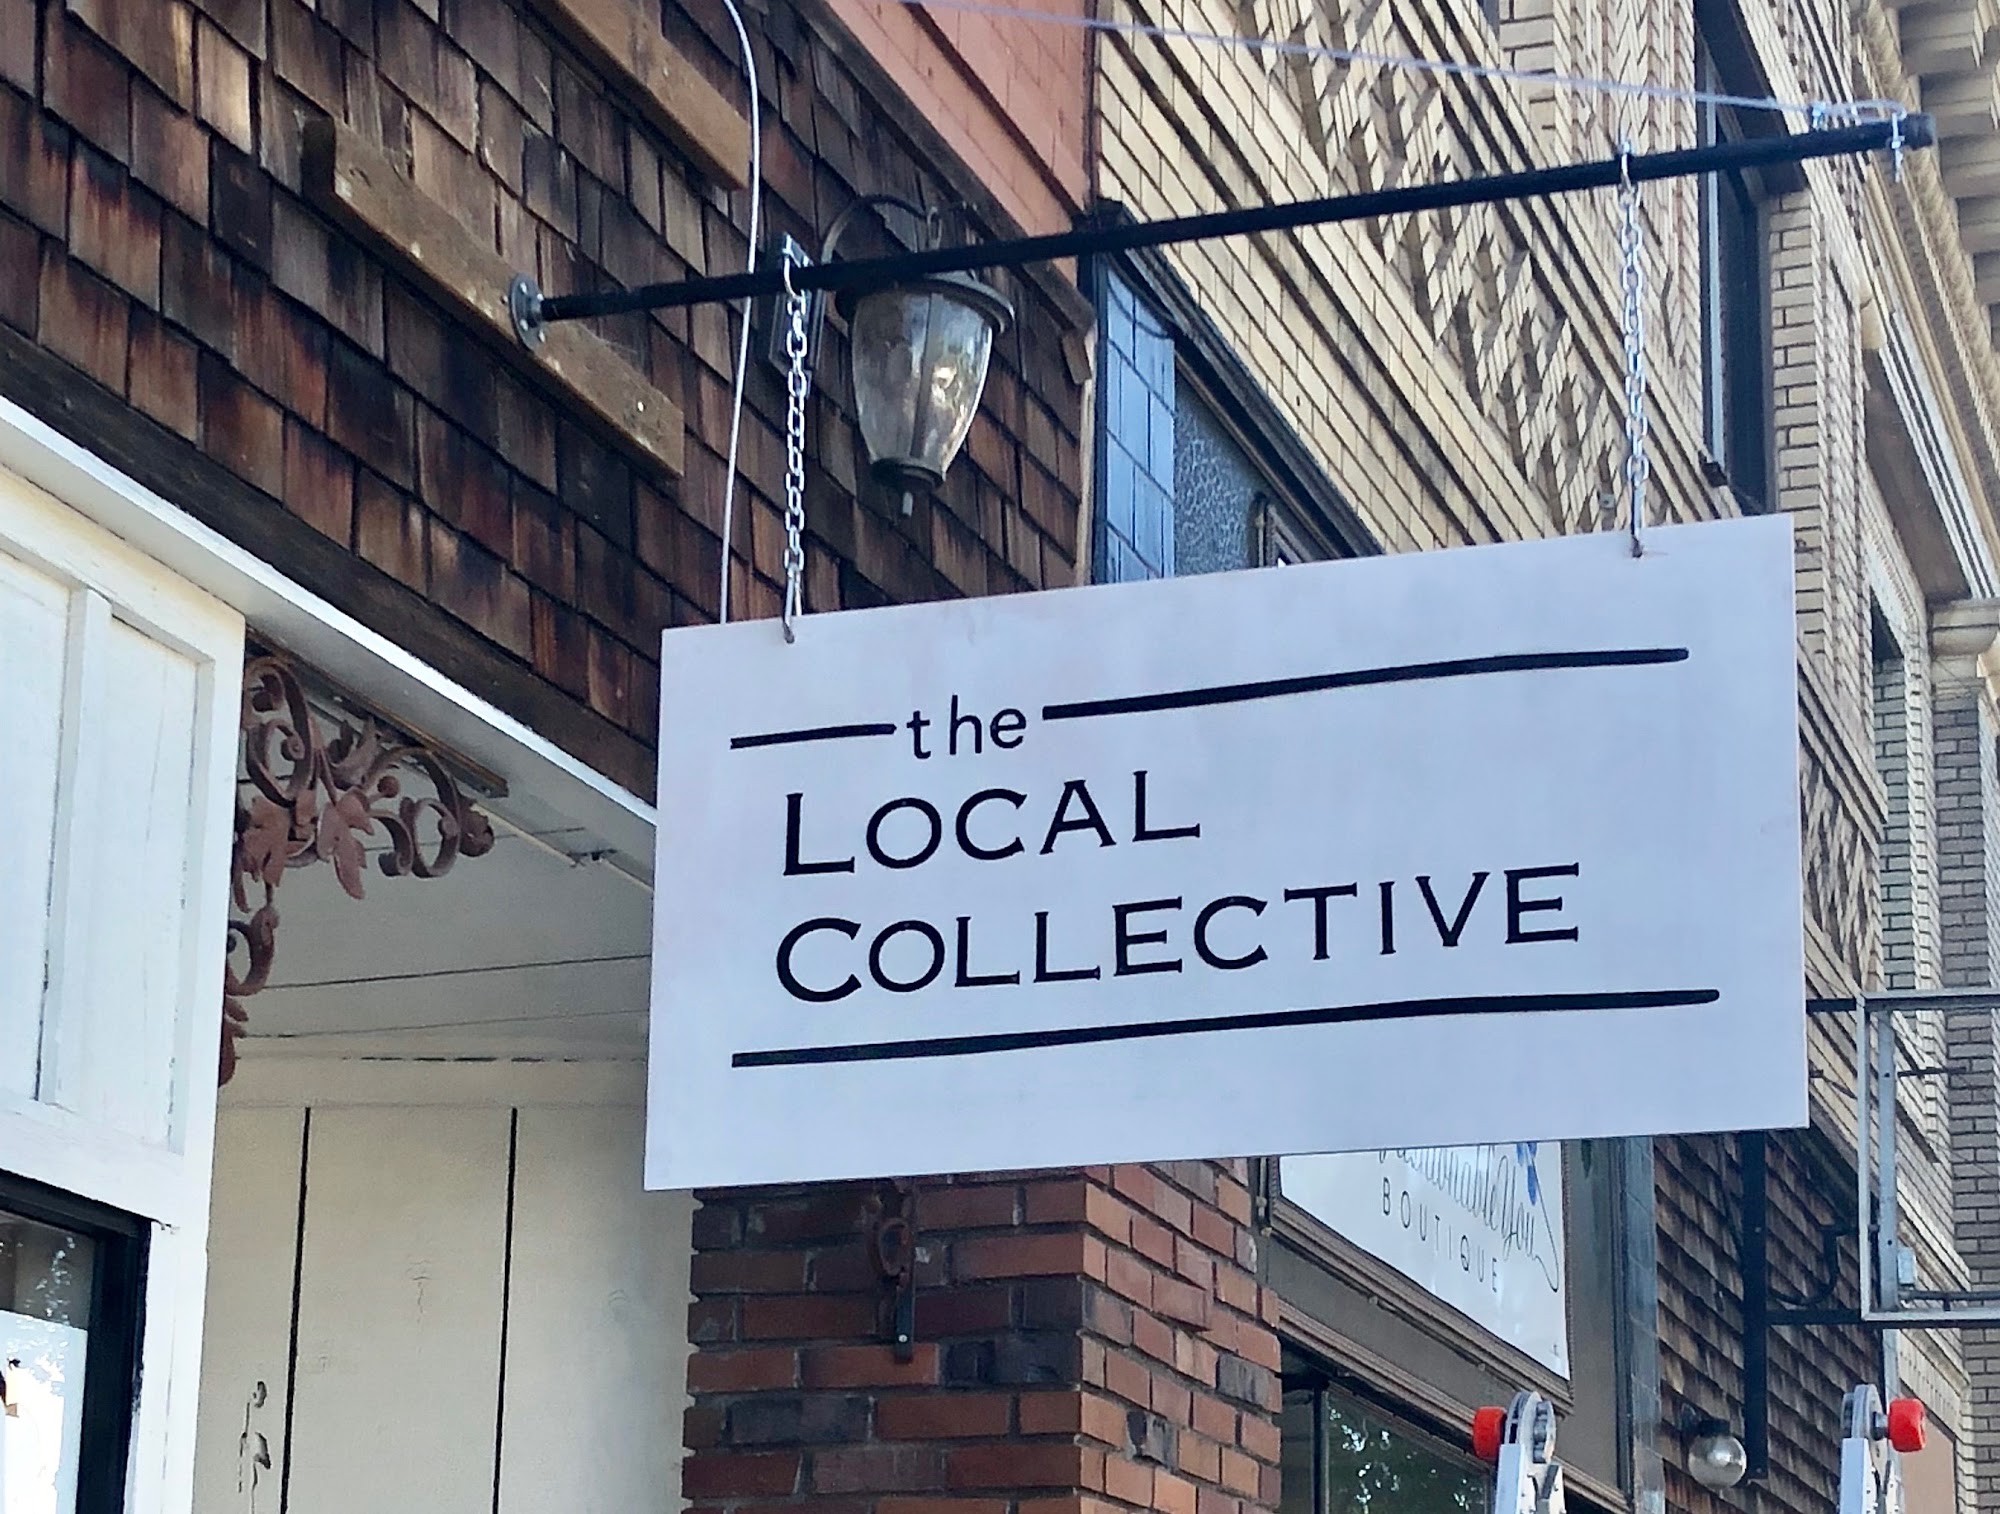 The Local Collective